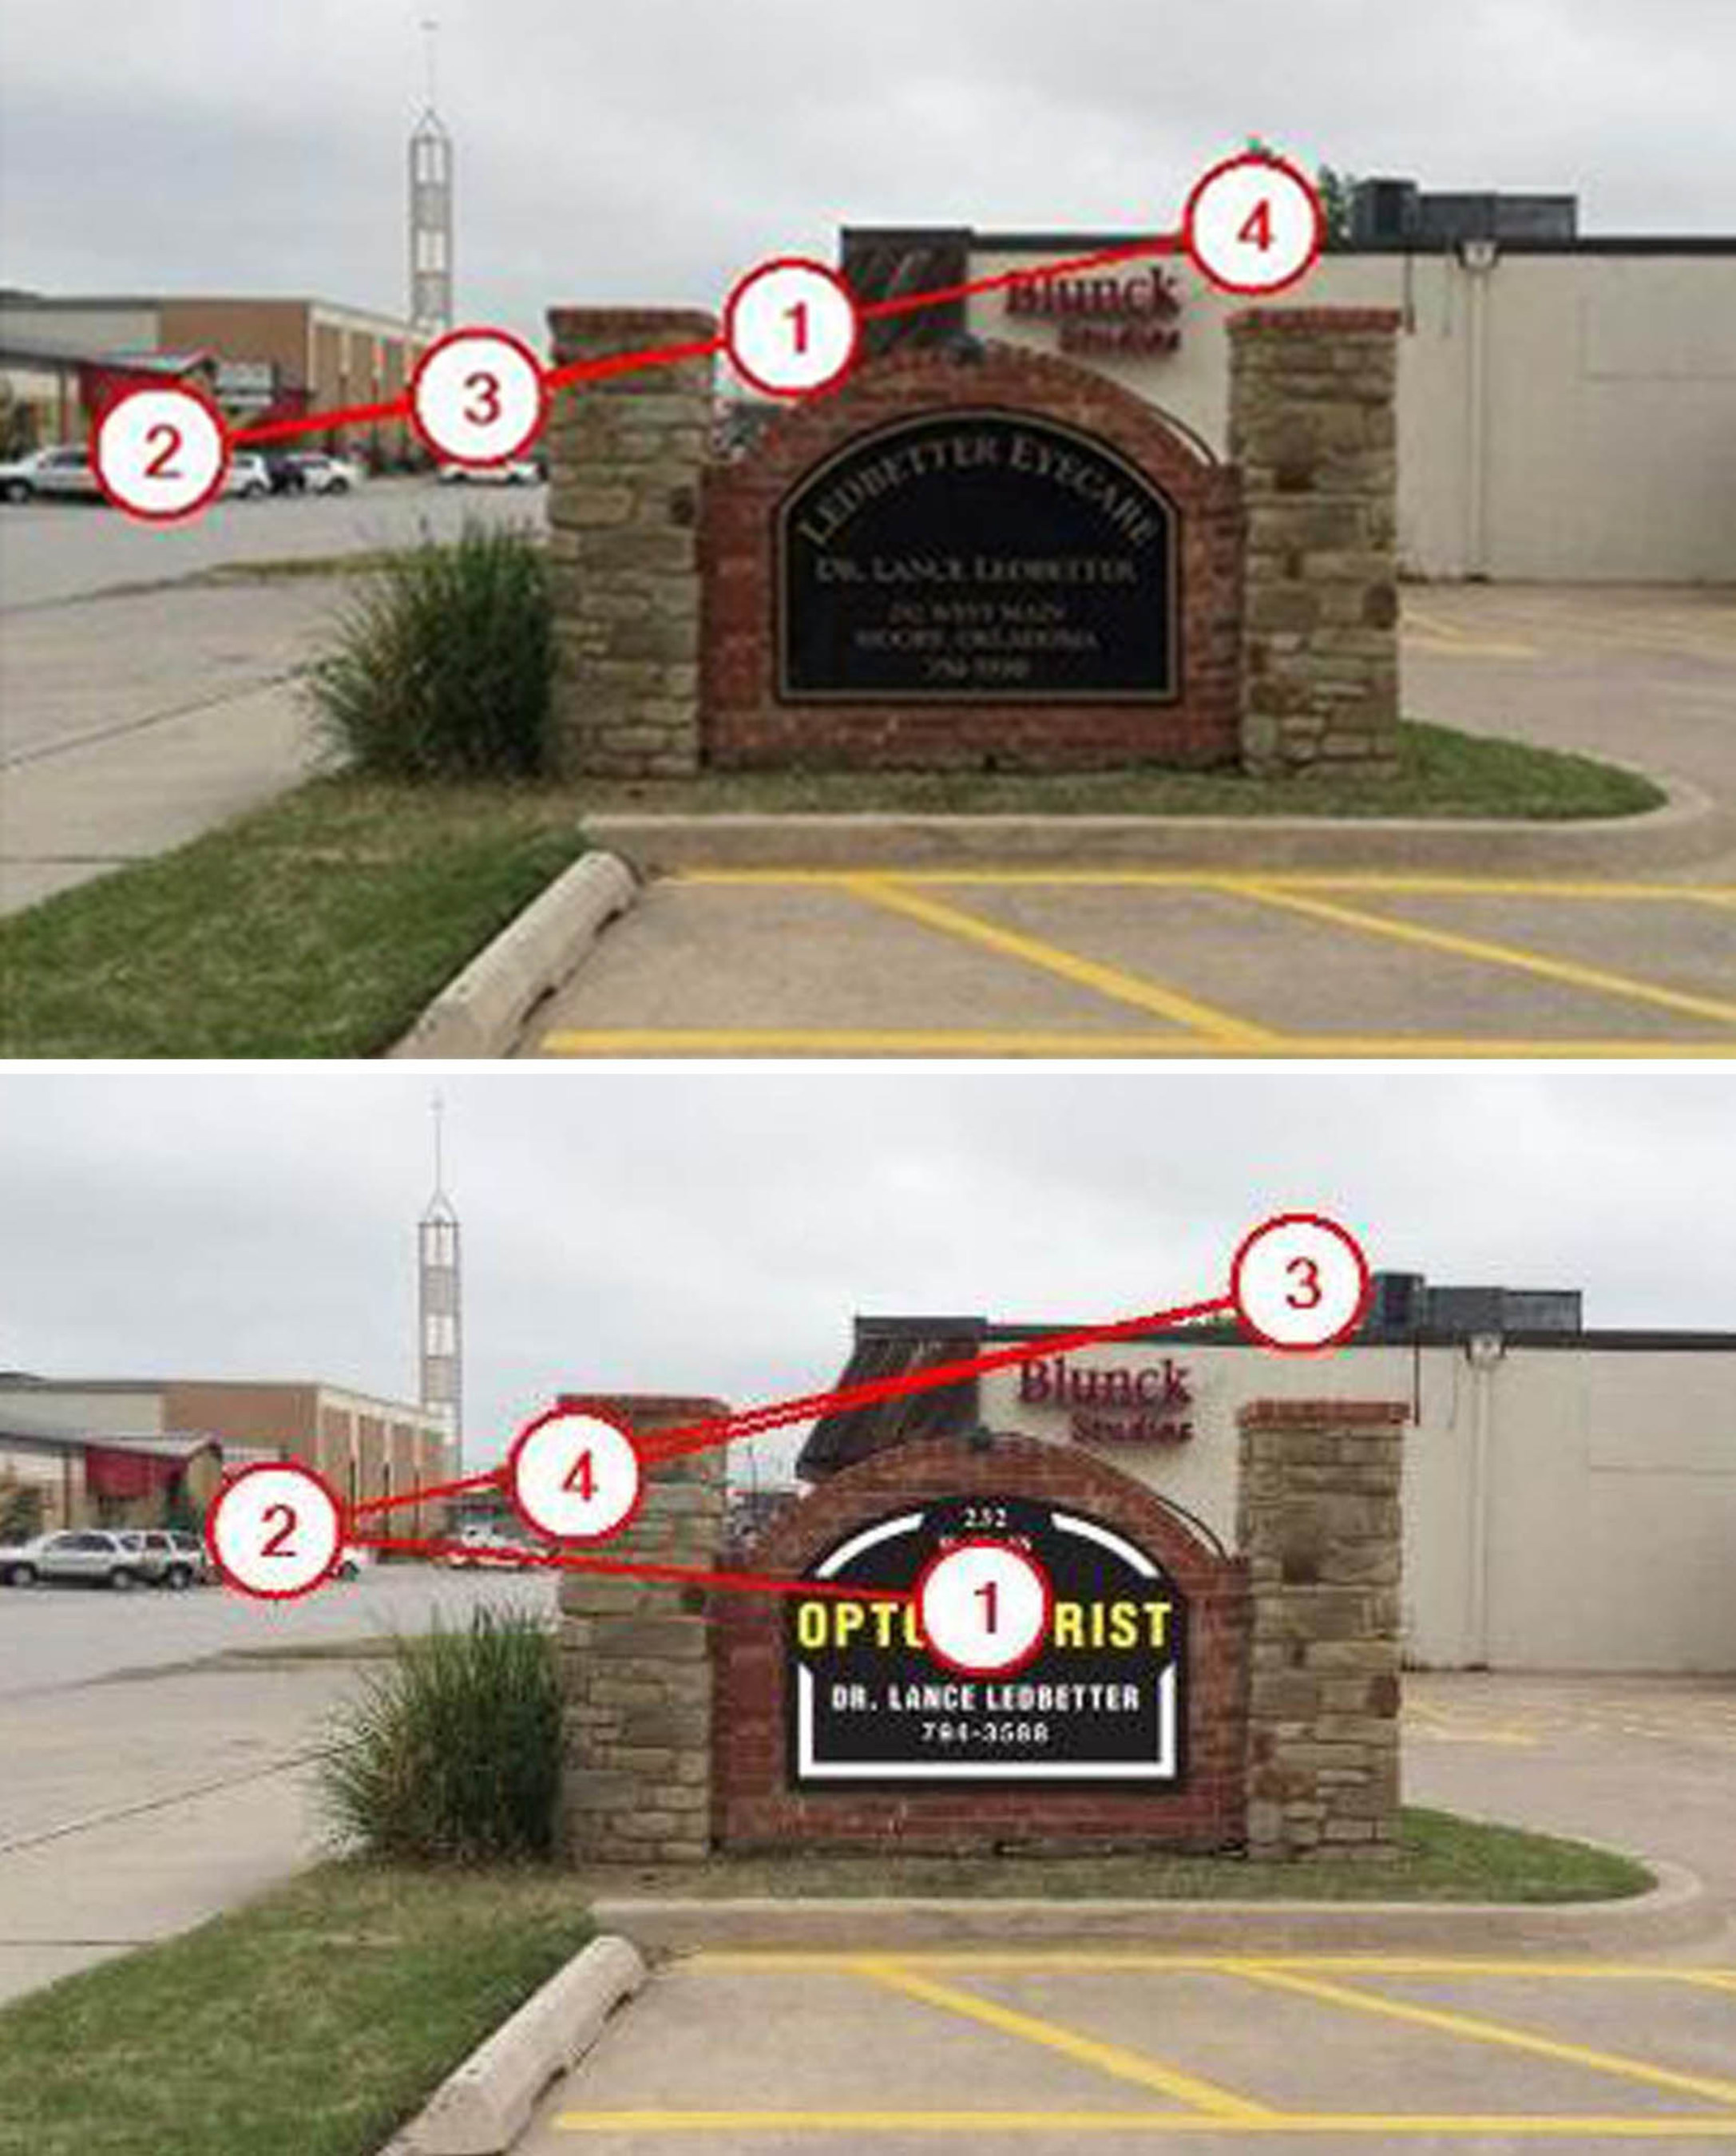 FASTSIGNS used 3M Visual Attention Software to analyze the graphic on an existing monument sign. The top image shows the "before" and the visual priority in the order that an eye is likely to go. The bottom image shows how the update to the sign could increase the chance that the sign will be noticed.